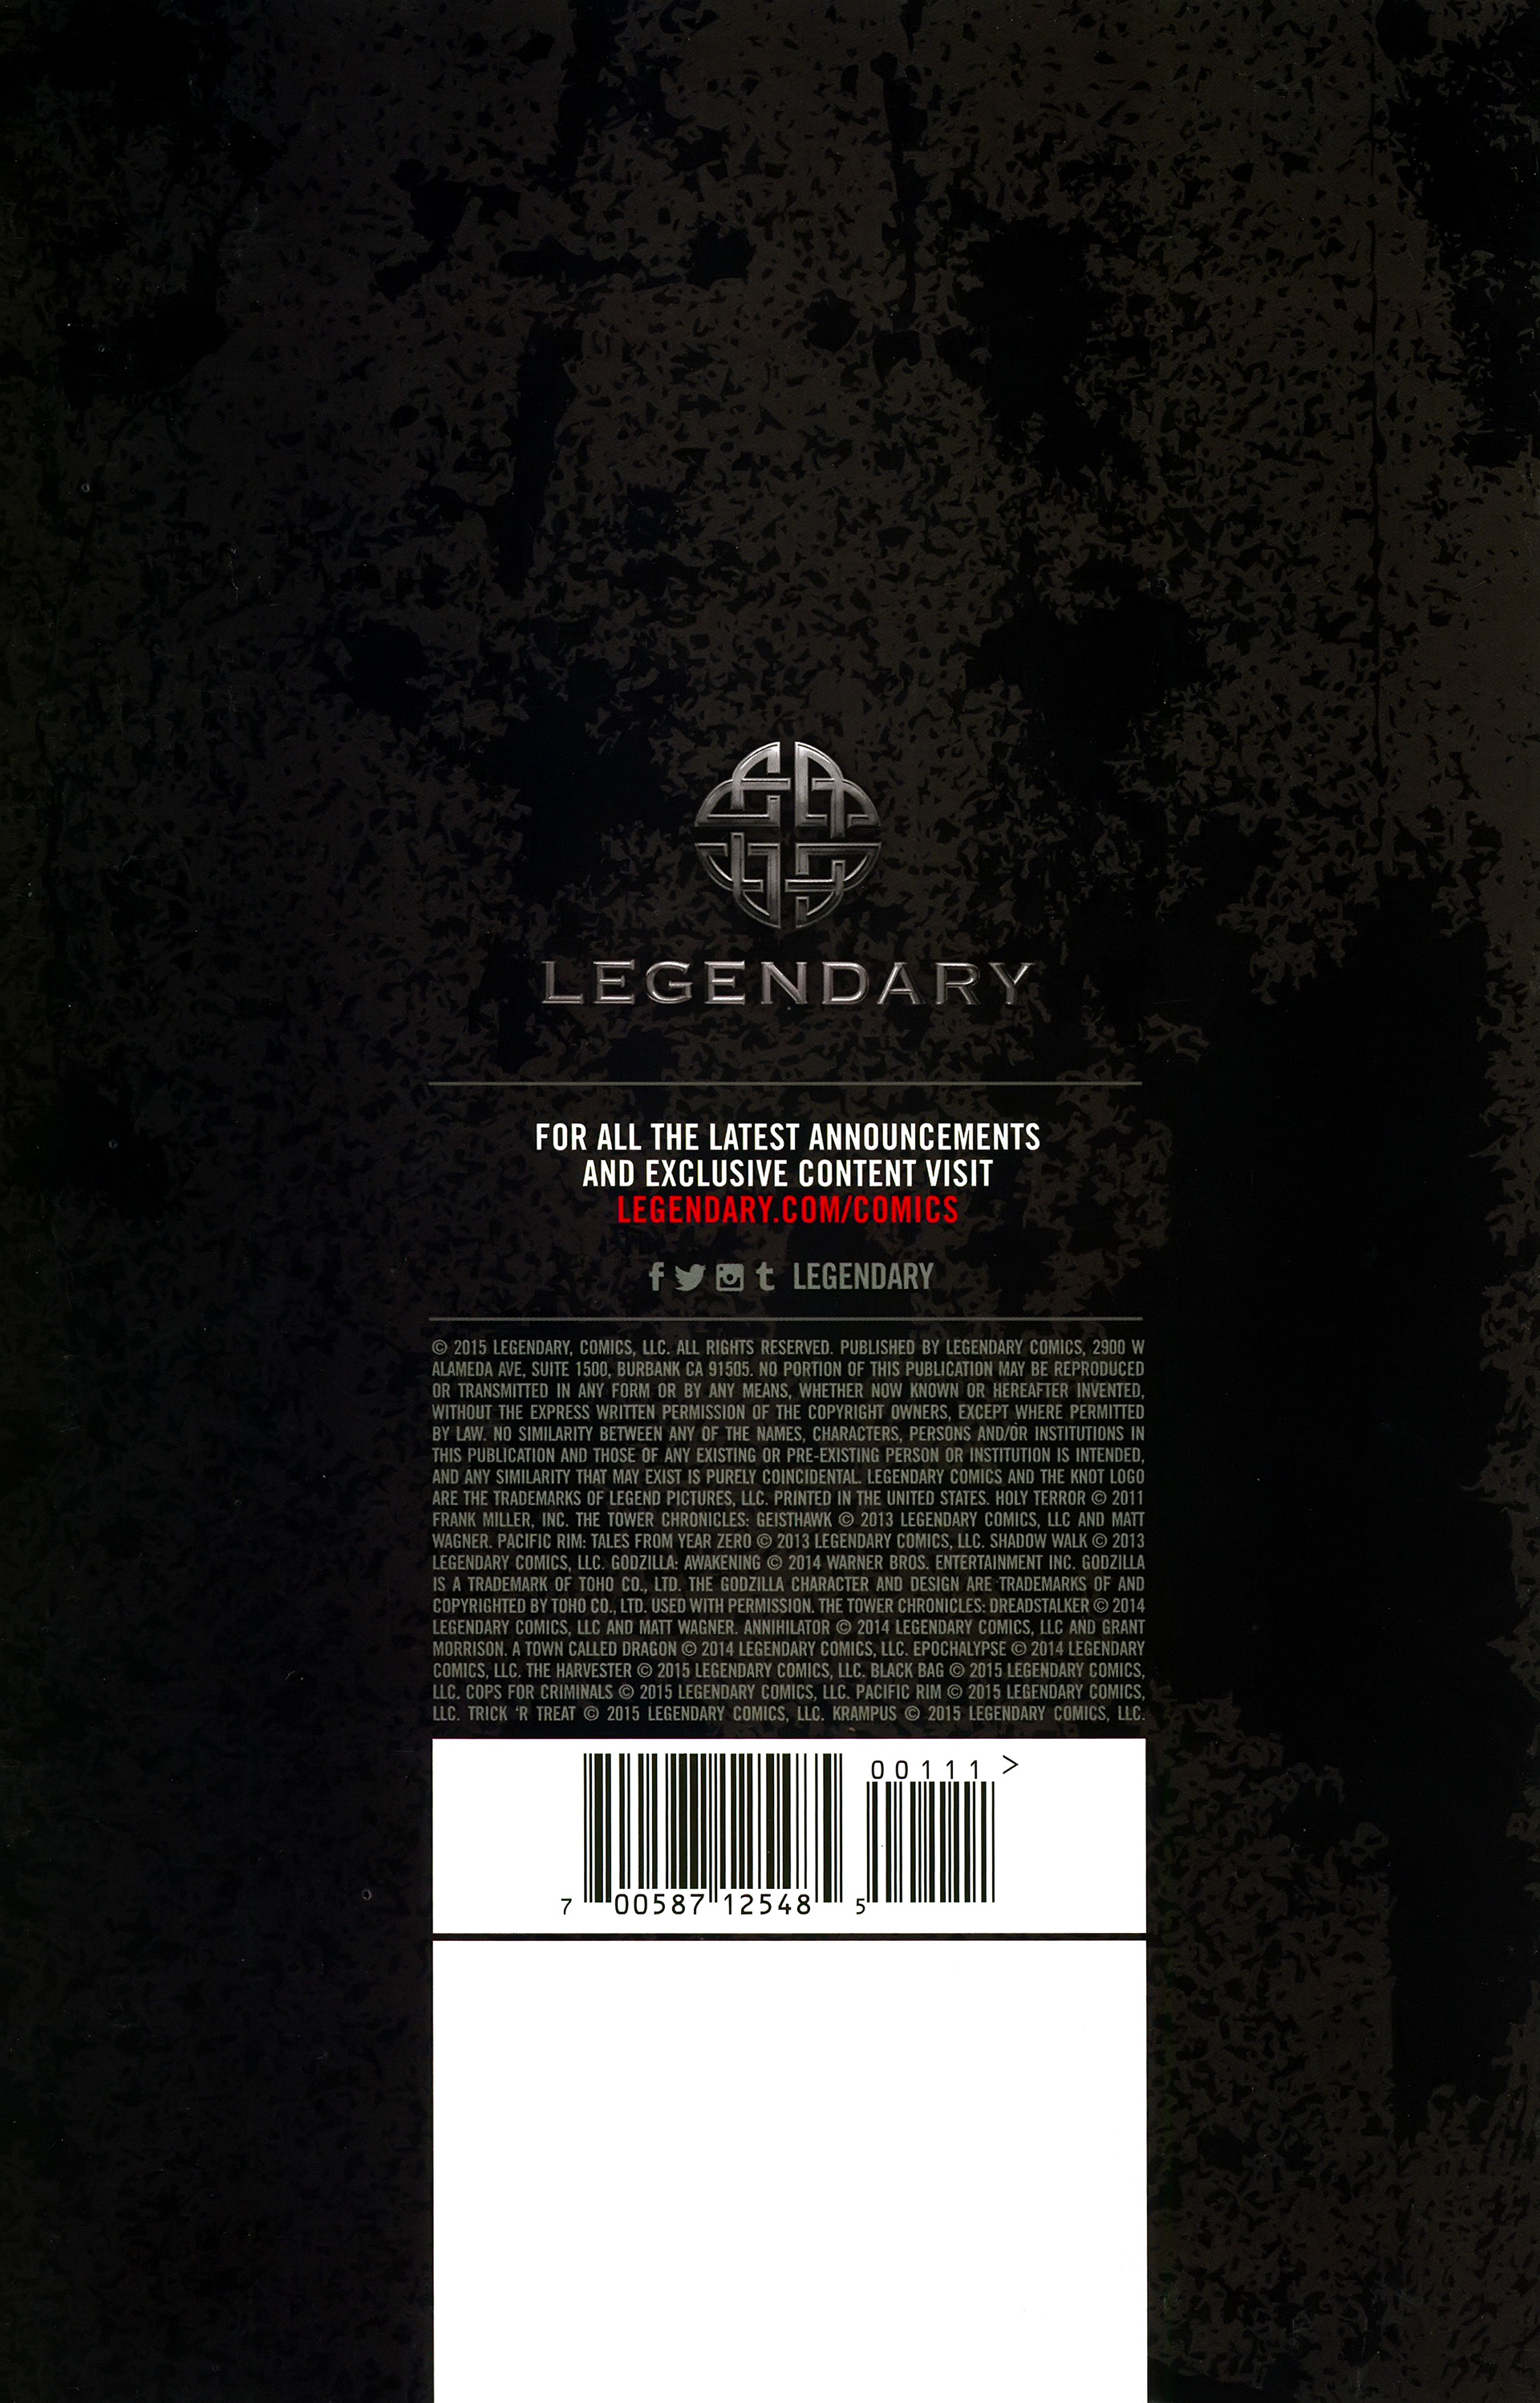 Read online Free Comic Book Day 2015 comic -  Issue # Legendary Comics 2015 Preview - 35